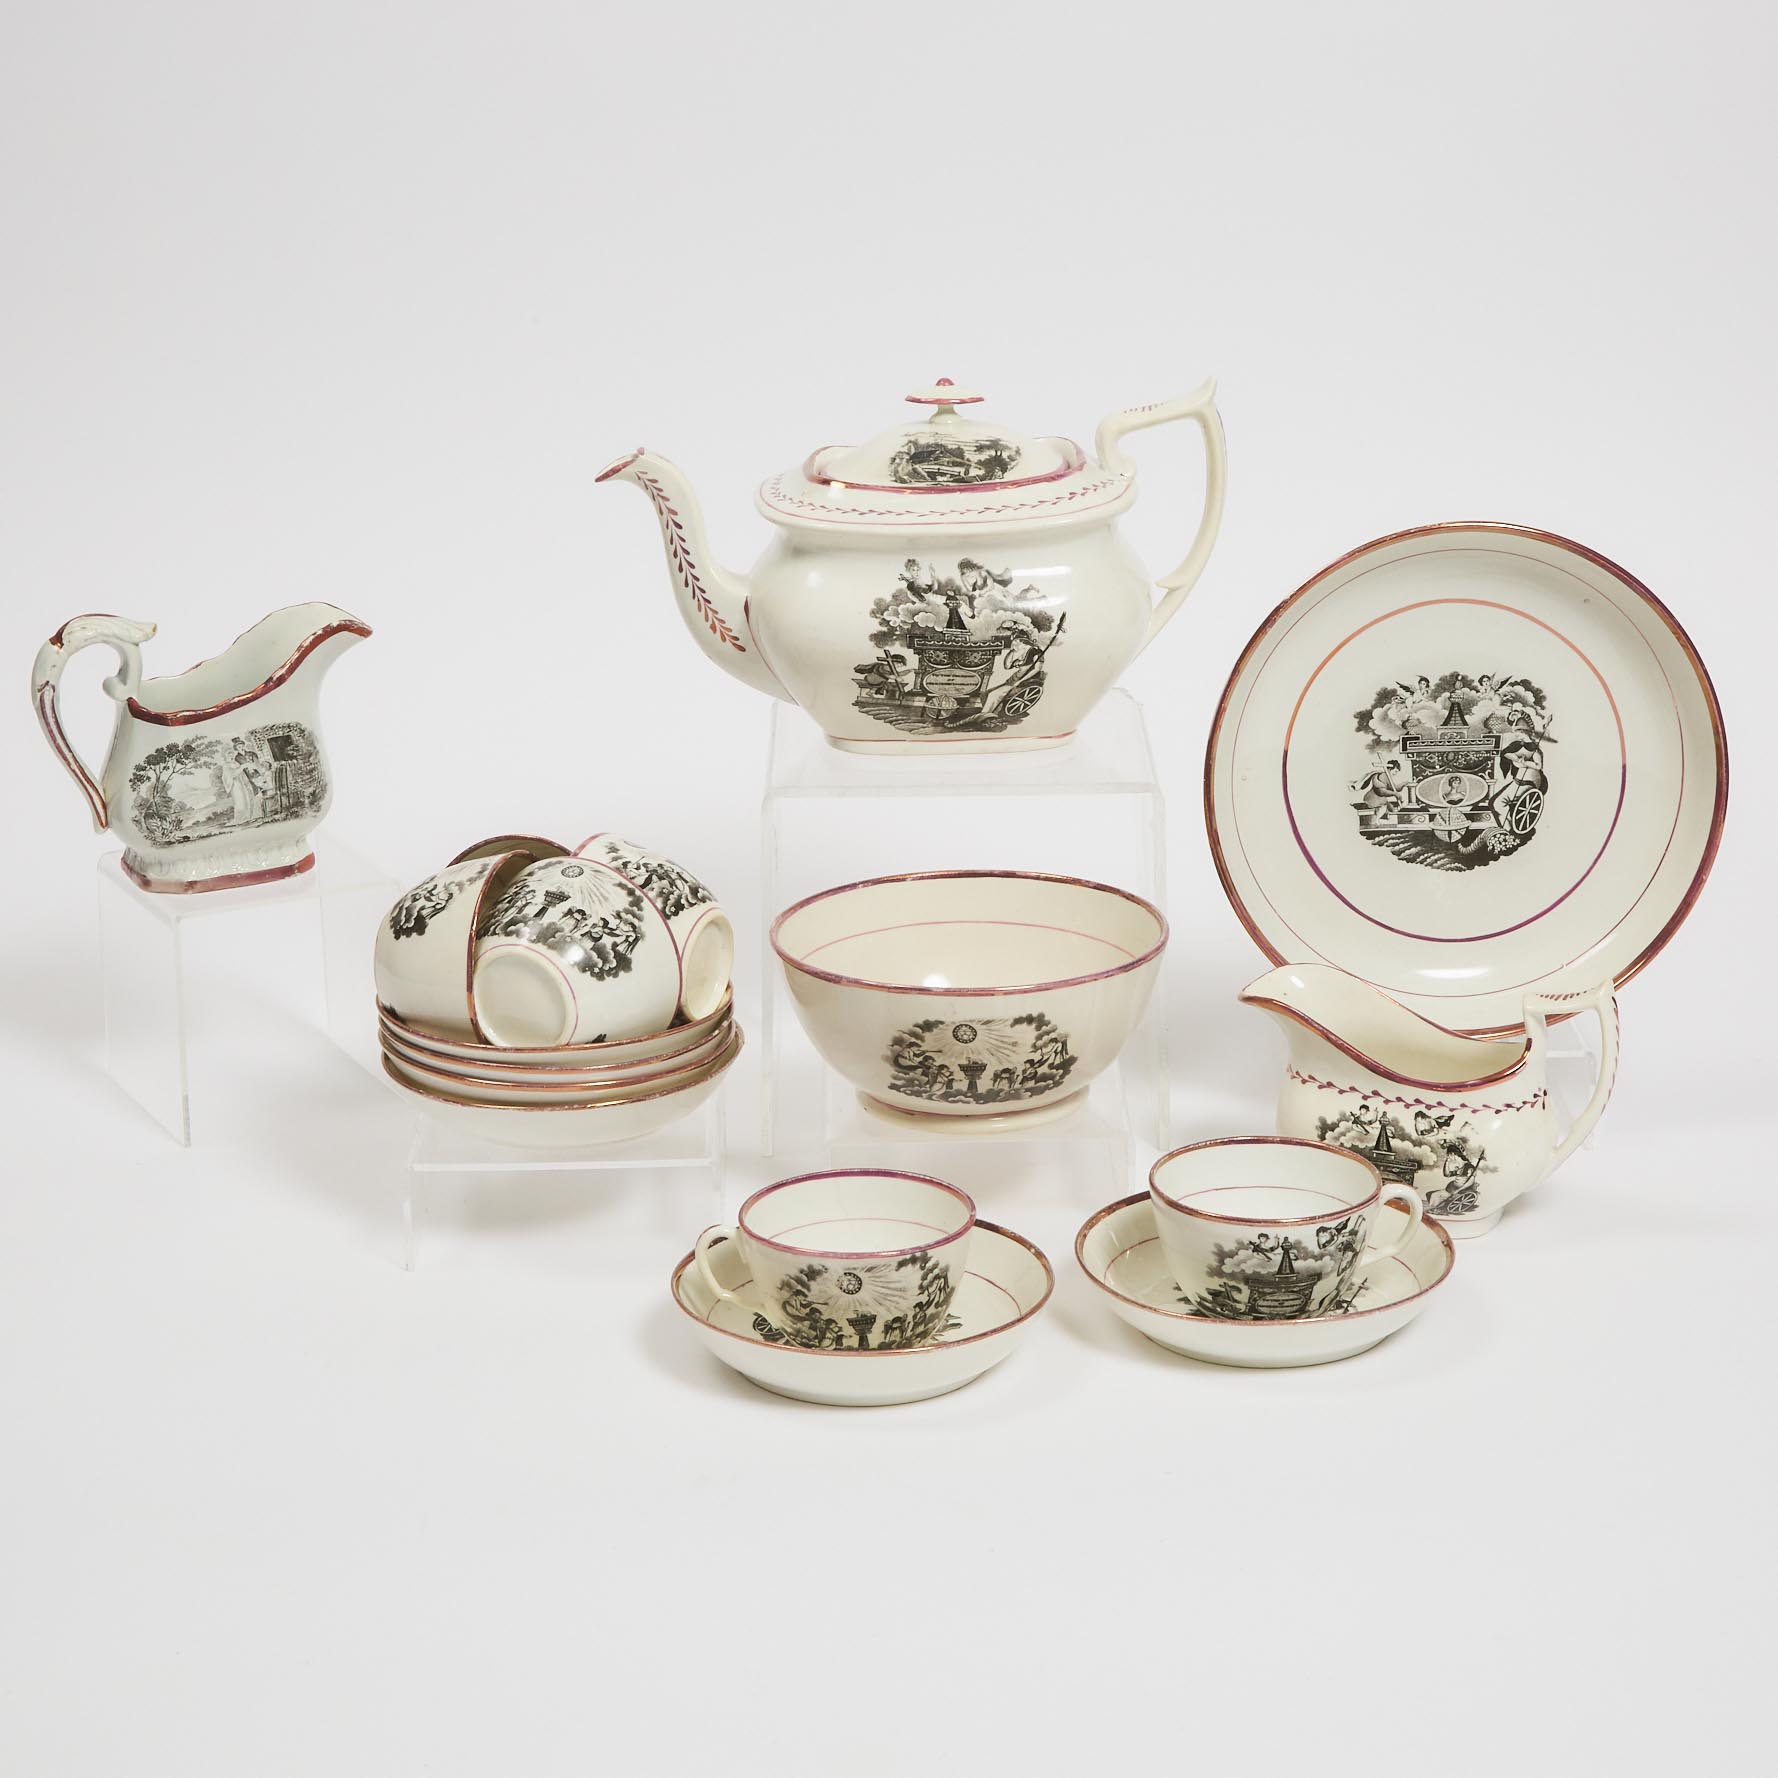 Group of Staffordshire Black Printed and Pink Lustre 'To the Memory of Princess Charlotte' Teawares, c.1817